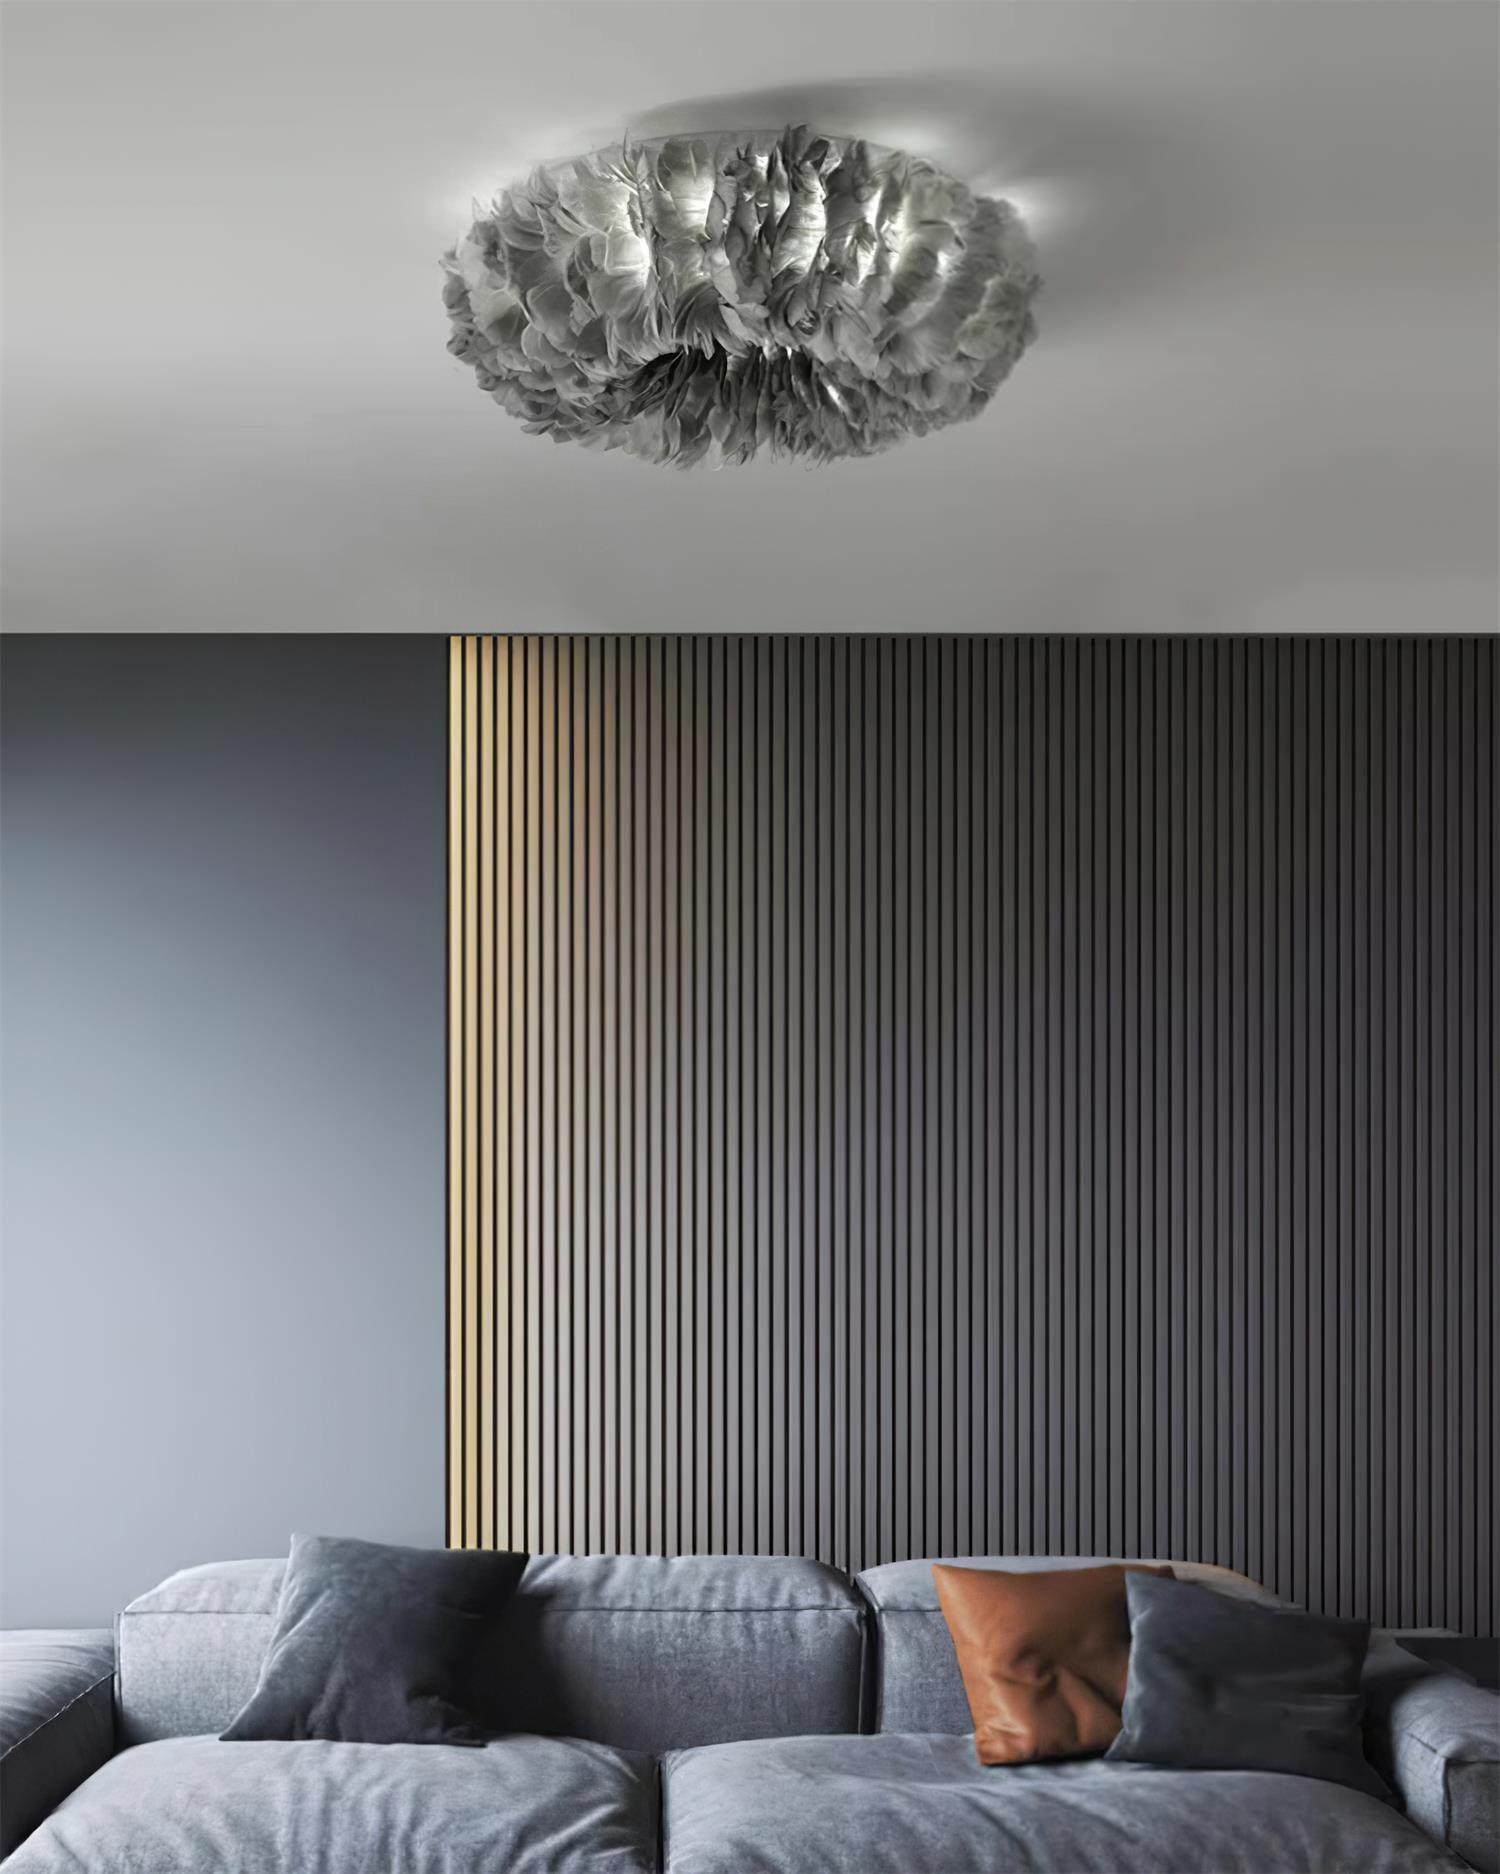 Rora Feather Ceiling Light - Docos